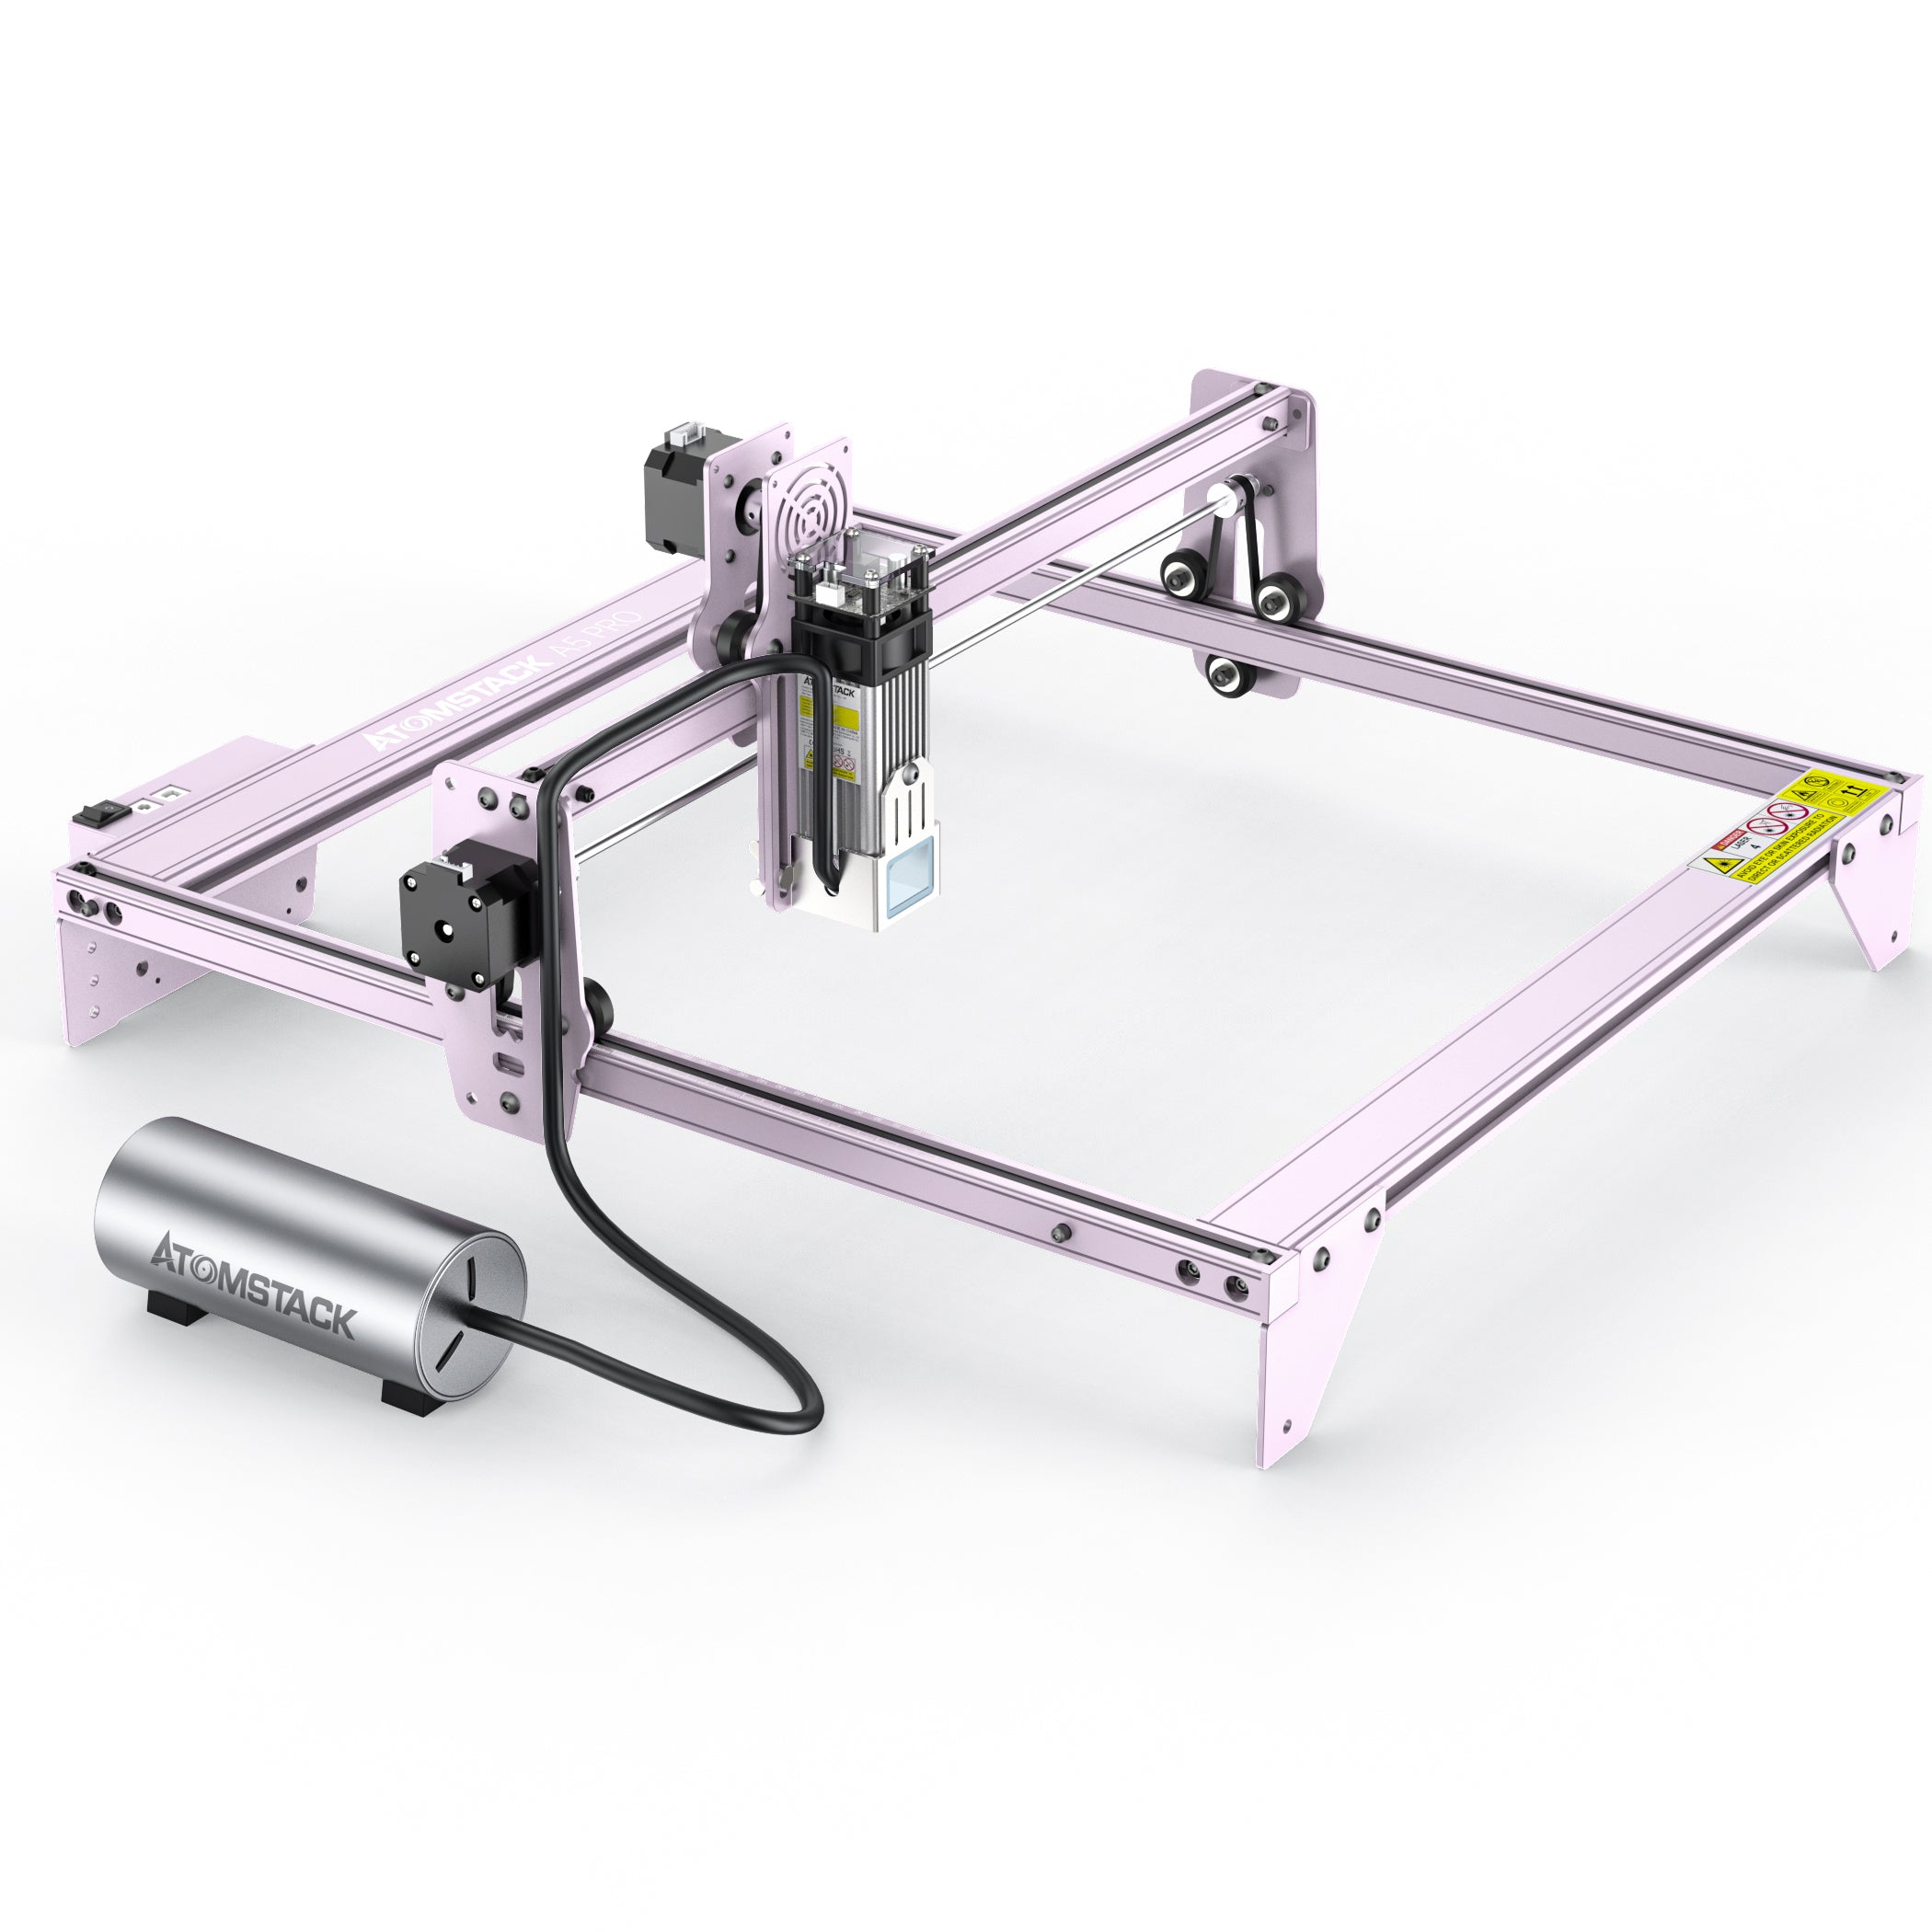 atomstack air assist system for laser cutter